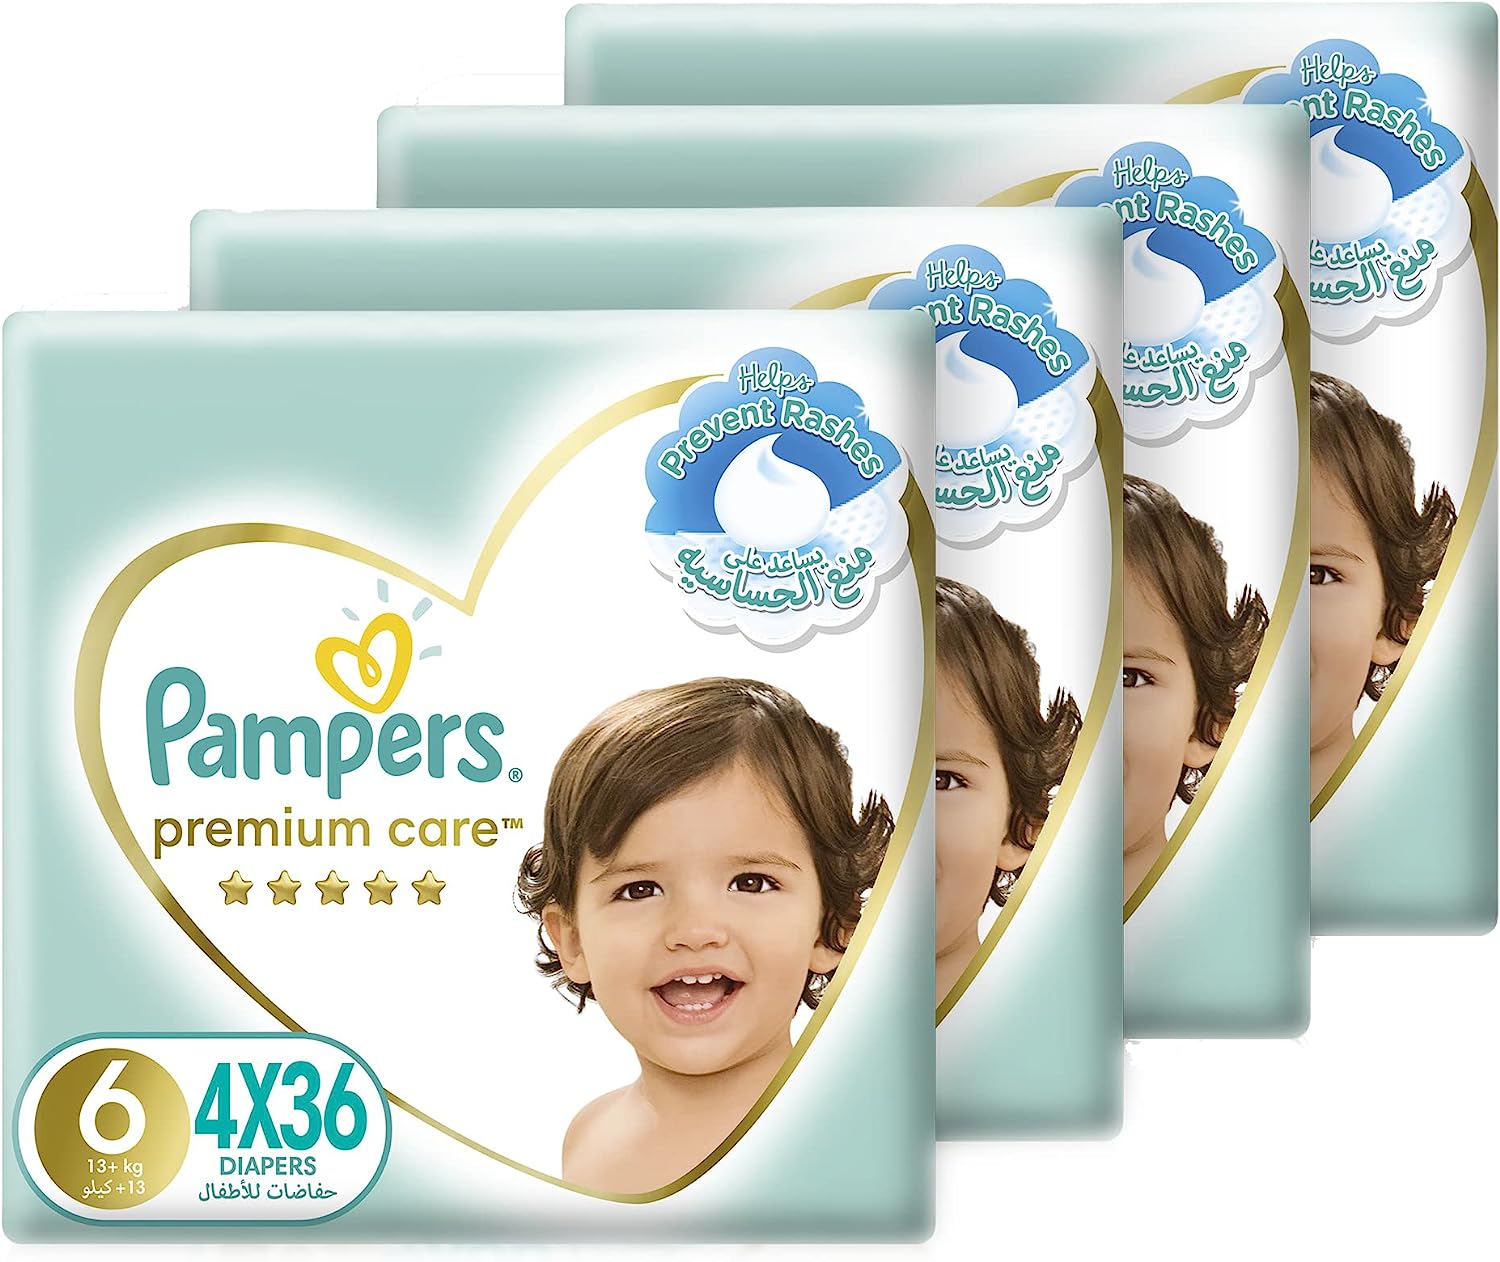 Pampers Premium Care Diapers, Size 6, 13+ Kg, The Softest Diaper And The Best Skin Protection, 144 Baby Diapers حفاضات بامبرز عناية مميزة، مقاس 6، +13 كغم،  144 حفاضة